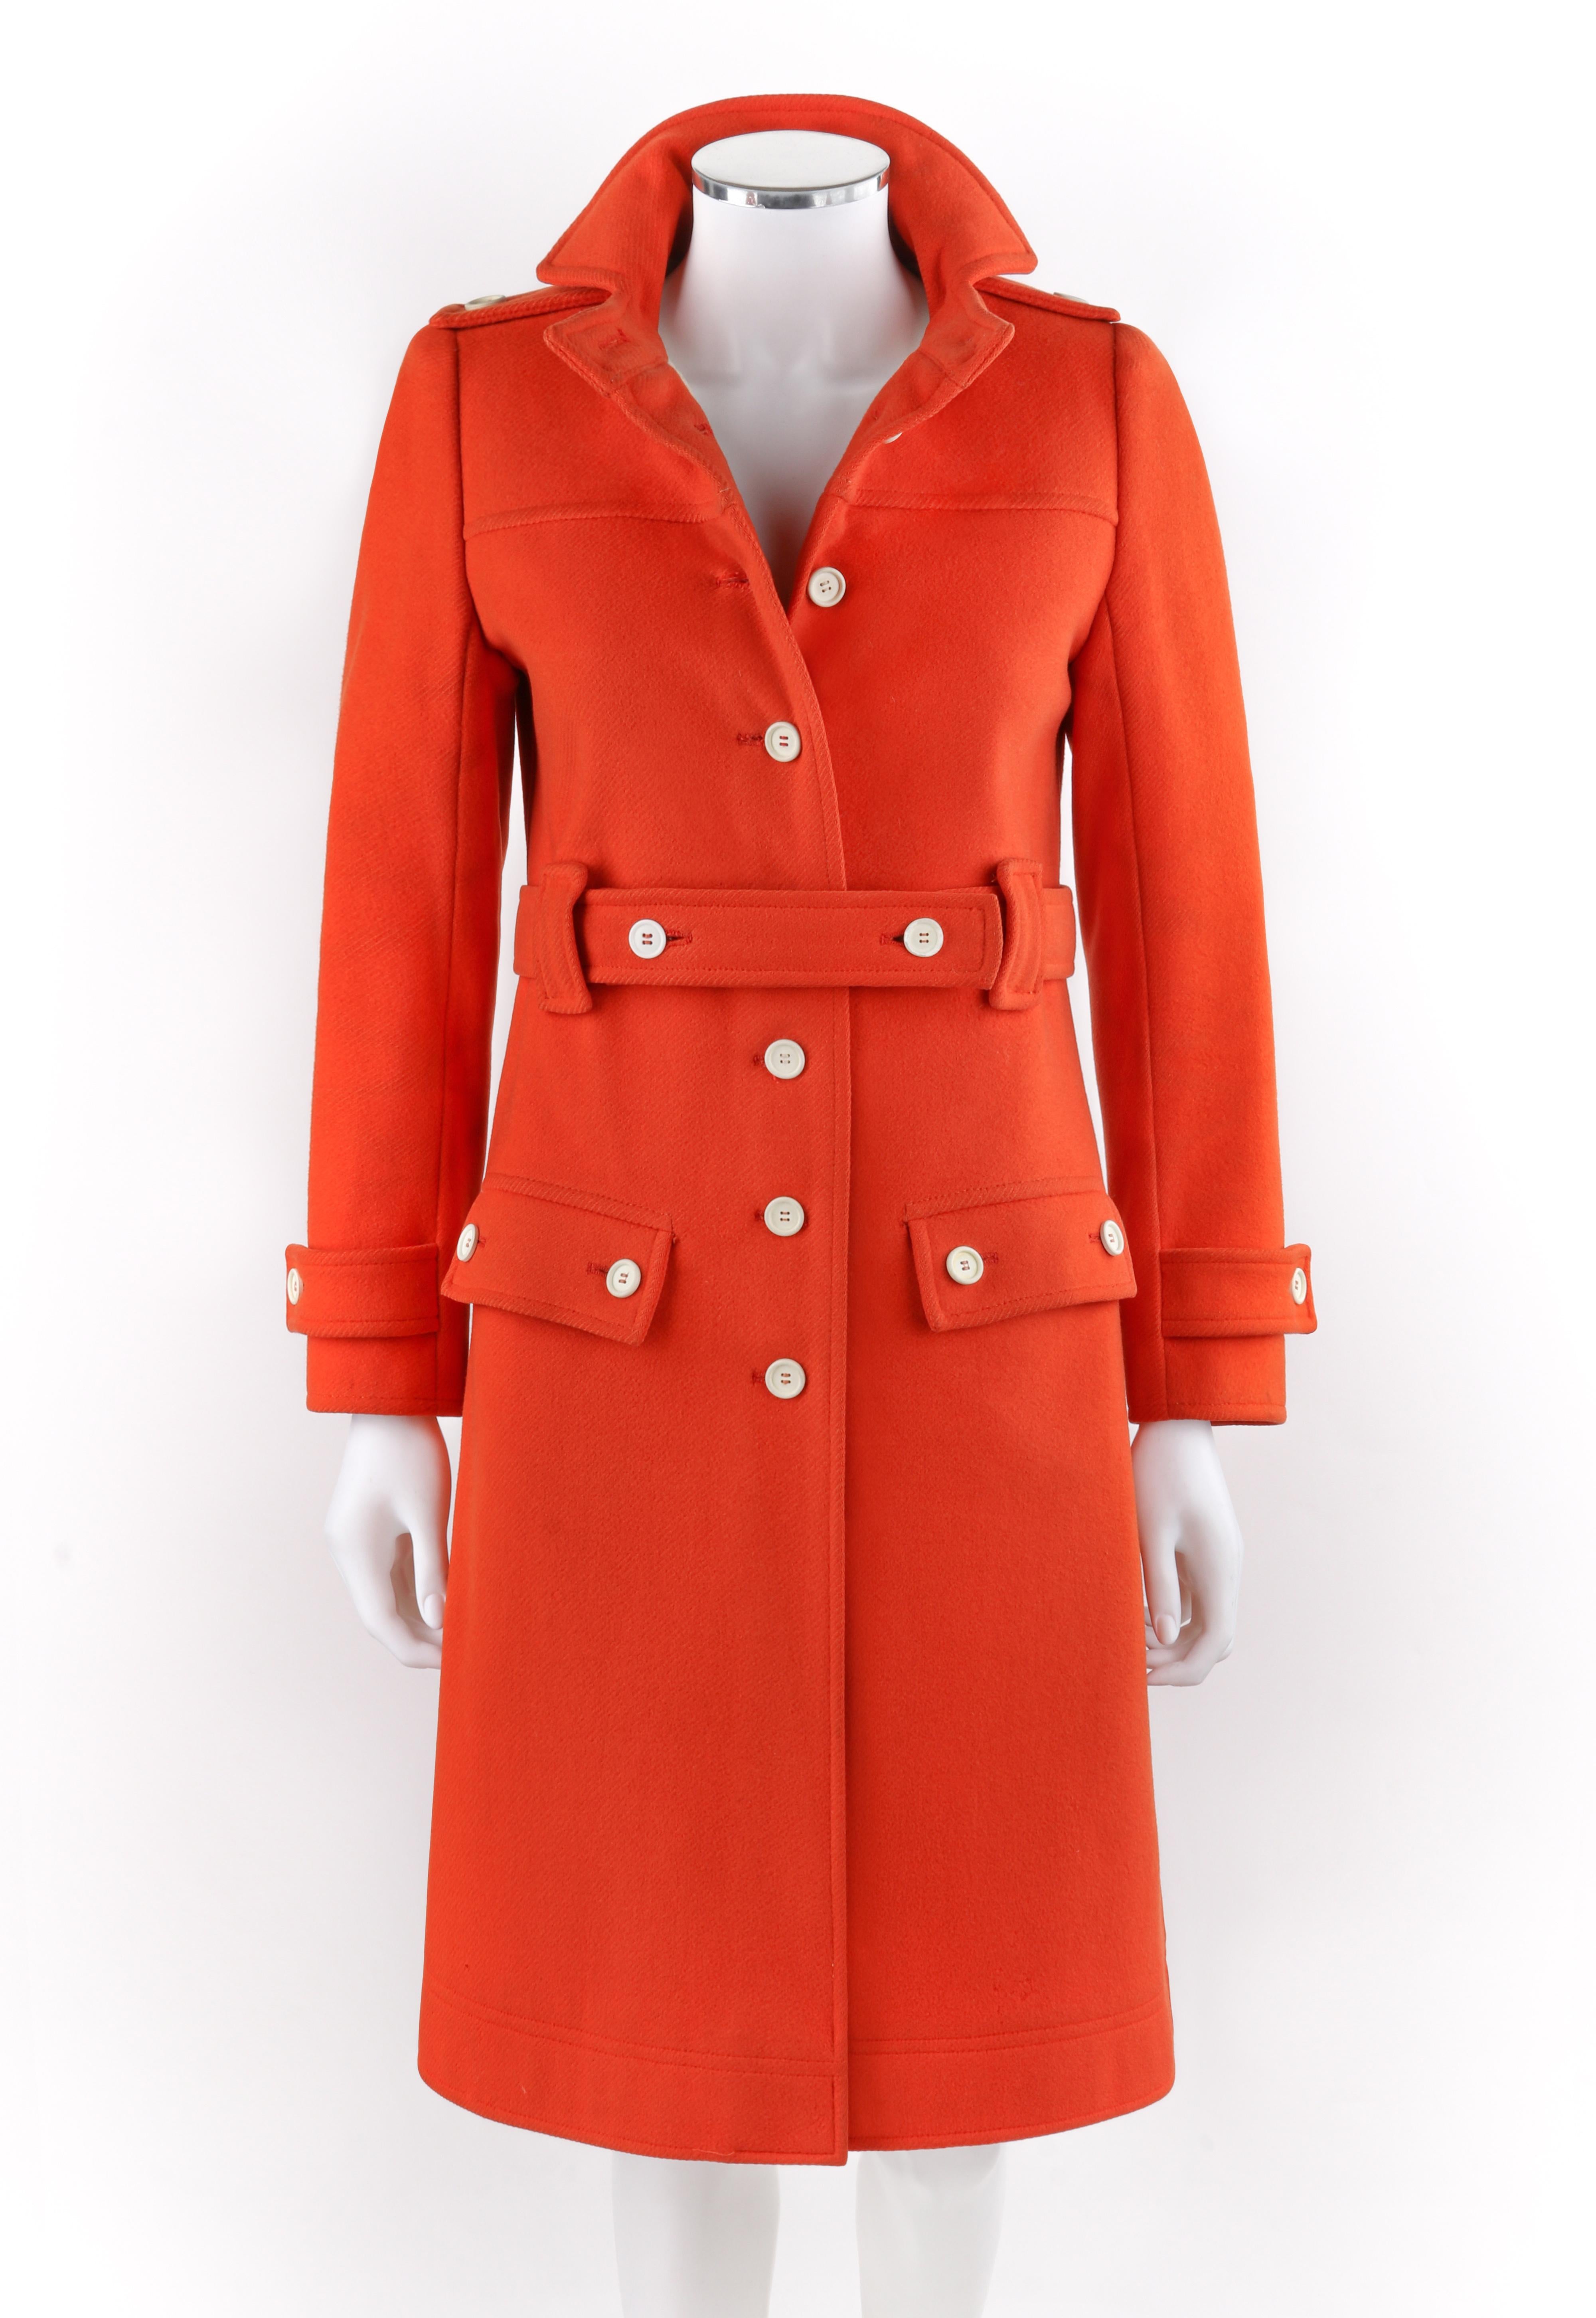 COURREGES c.1970’s Hyperbole Orange Belted Button Up Detail Overcoat Numbered

Circa: 1970’s
Label(s): Courreges ‘Hyperbole’ -numbered
Designer: Andre Courreges
Style: Belted Overcoat
Color(s): Orange (exterior); off white (lining)
Lined: